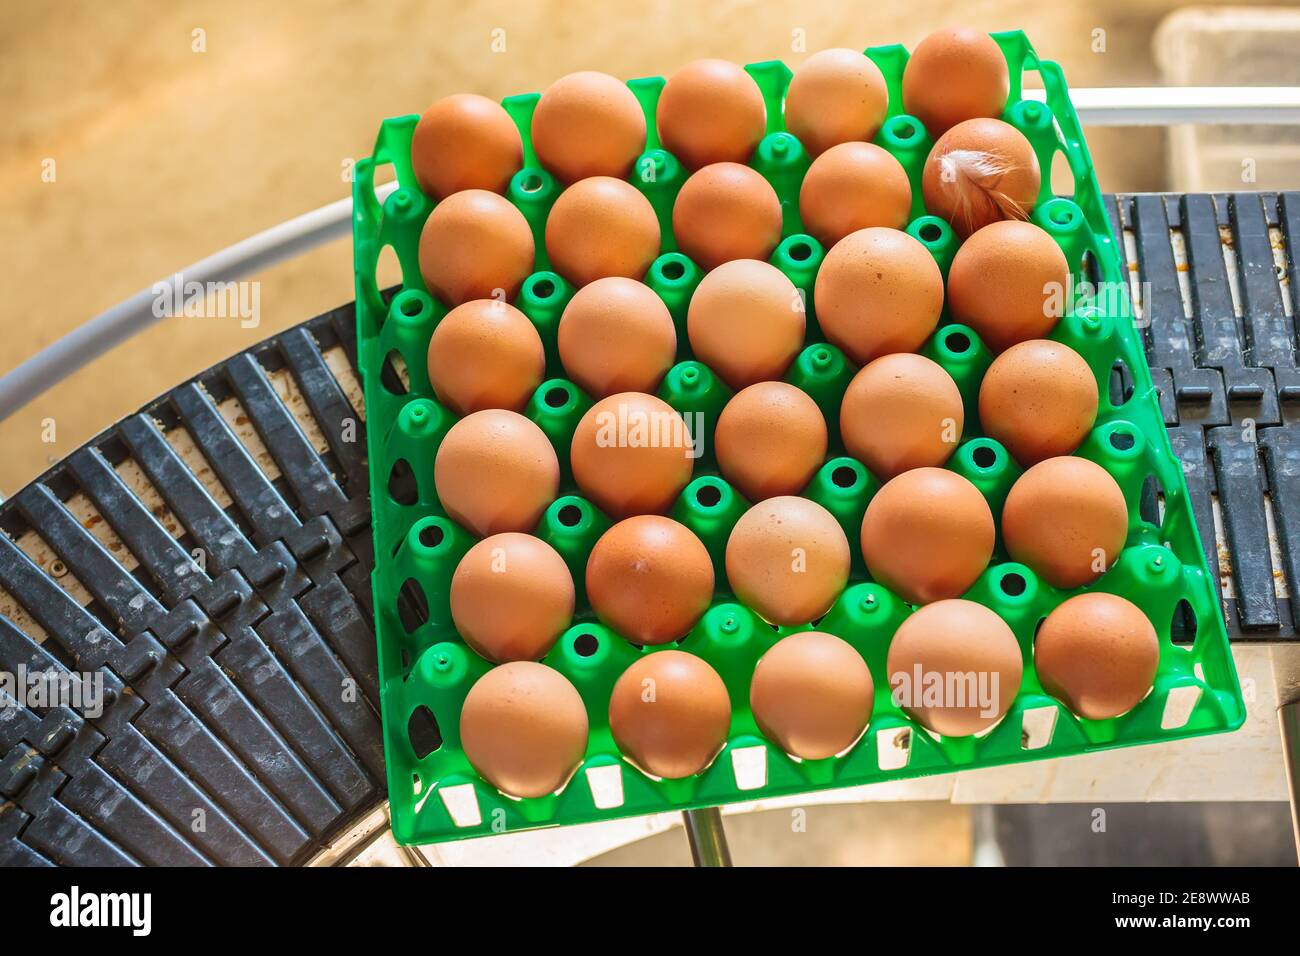 Conveyor belt transporting a crate with fresh eggs on an organic chicken farm Stock Photo